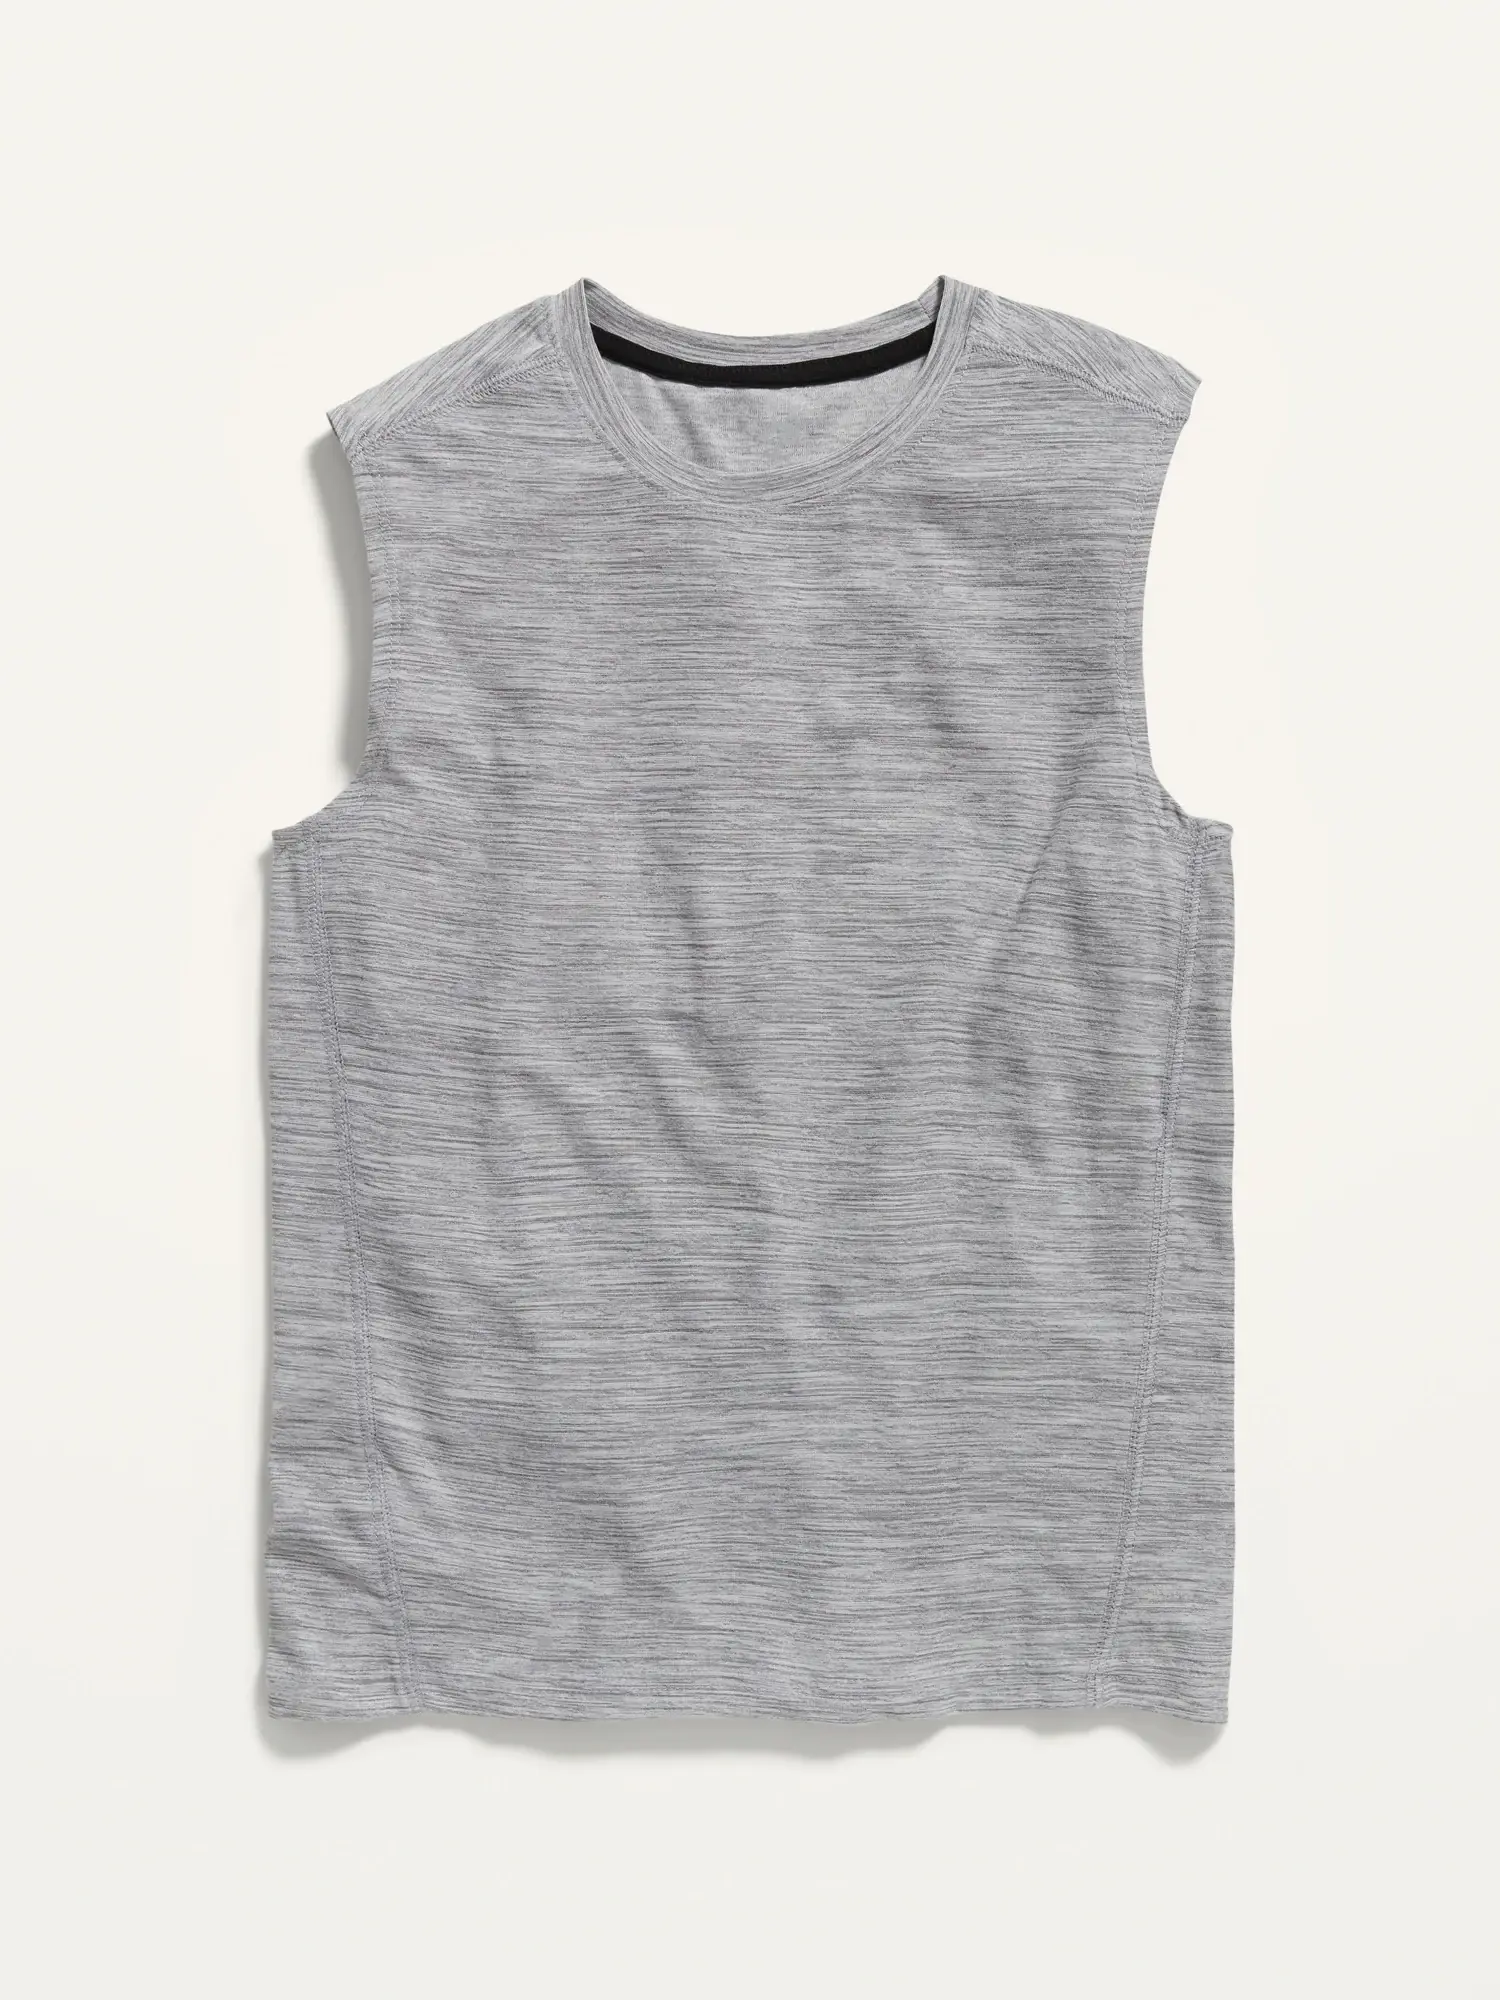 Old Navy Breathe ON Performance Tank Top for Boys gray. 1